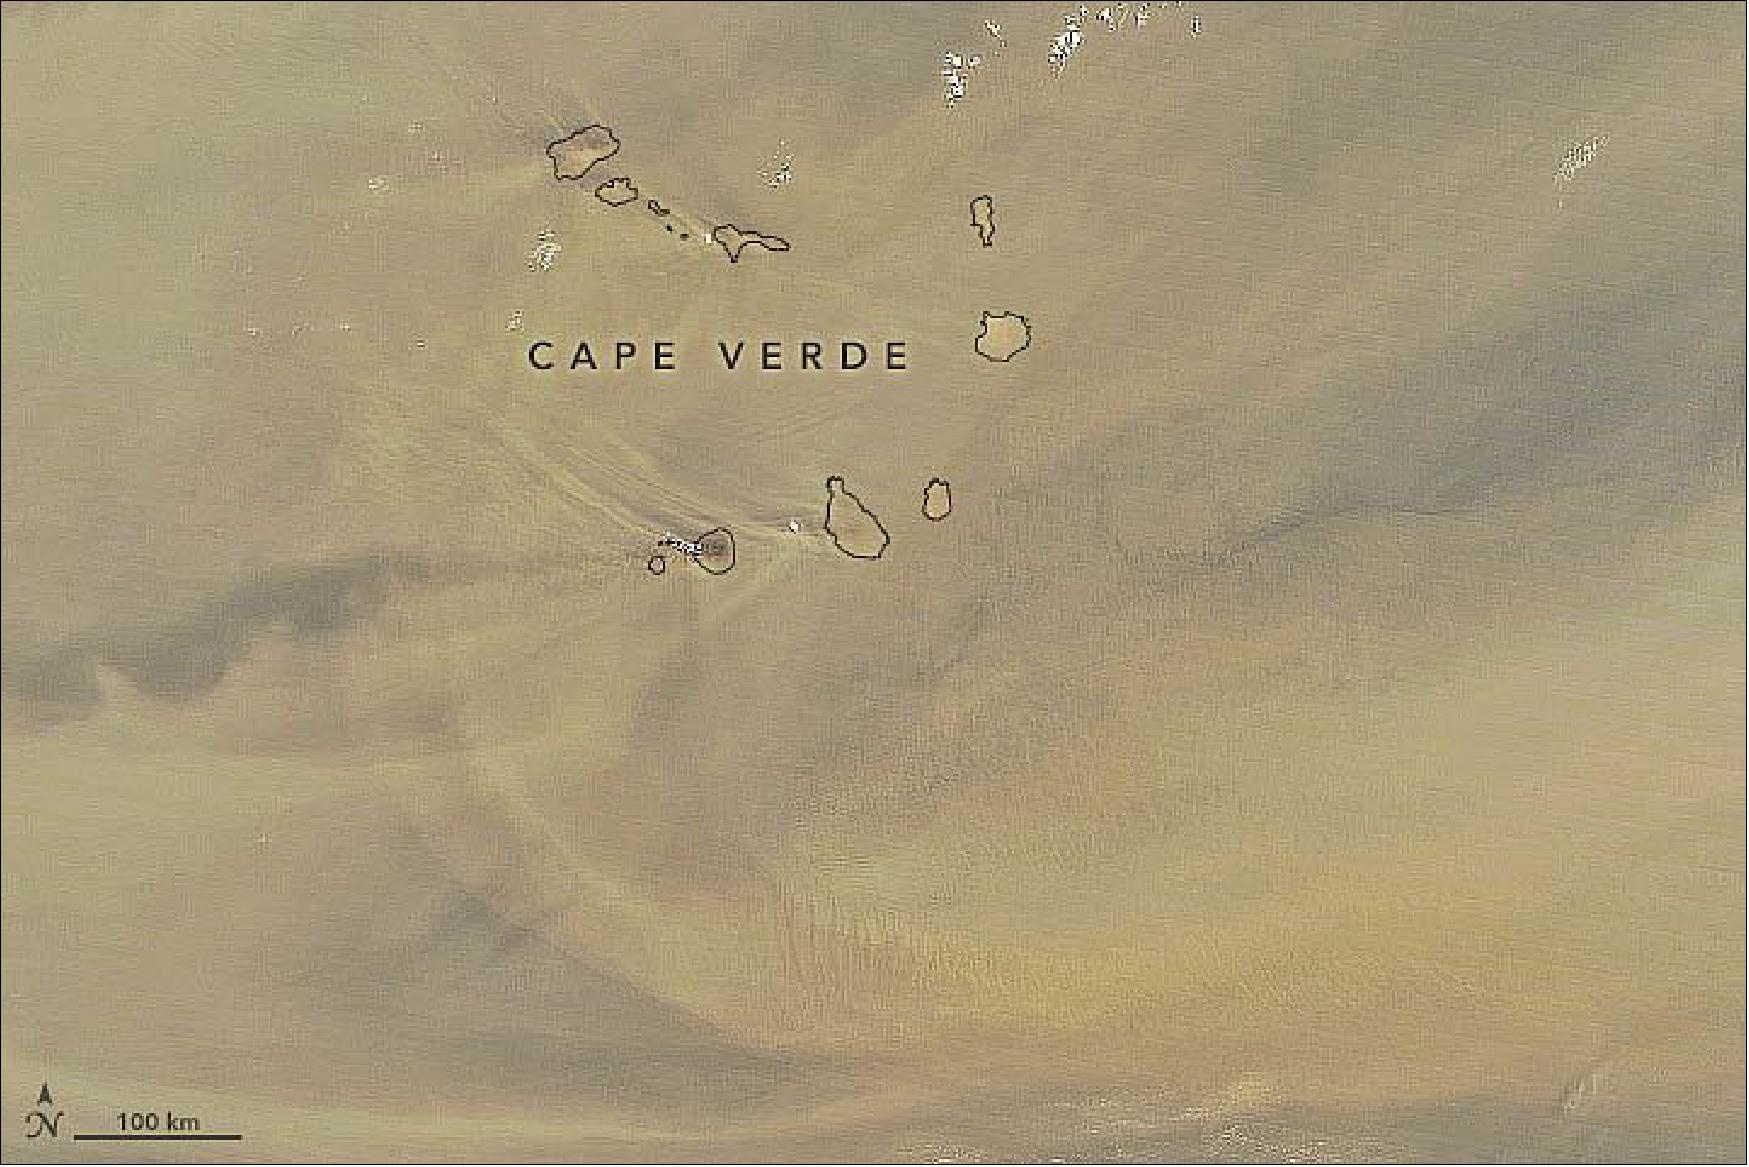 Figure 16: That same day, the Moderate Resolution Imaging Spectroradiometer (MODIS) on NASA’s Terra satellite acquired a detailed view of the dust over the Cape Verde (Cabo Verde) islands. The archipelago, located about 570 km off the west coast of Africa, is frequently in the path of dust plumes (image credit: NASA Earth Observatory)